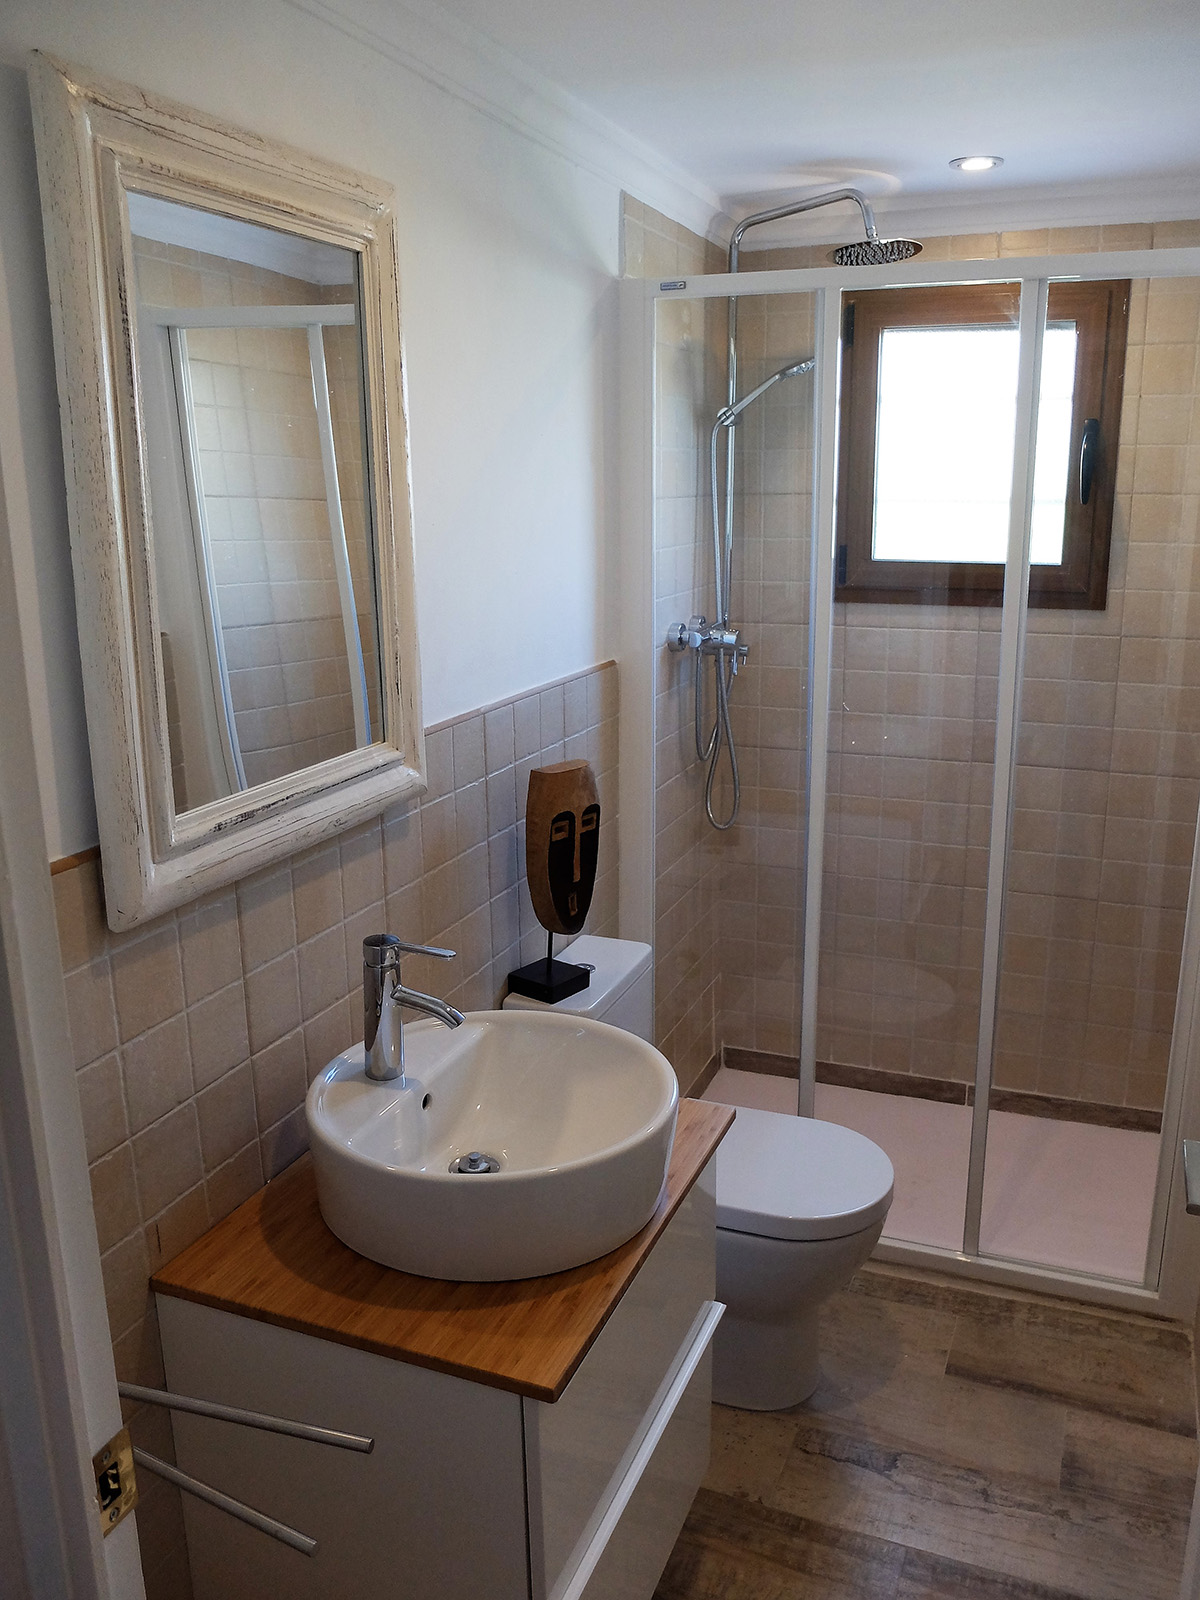 Shower room with sink and toilet